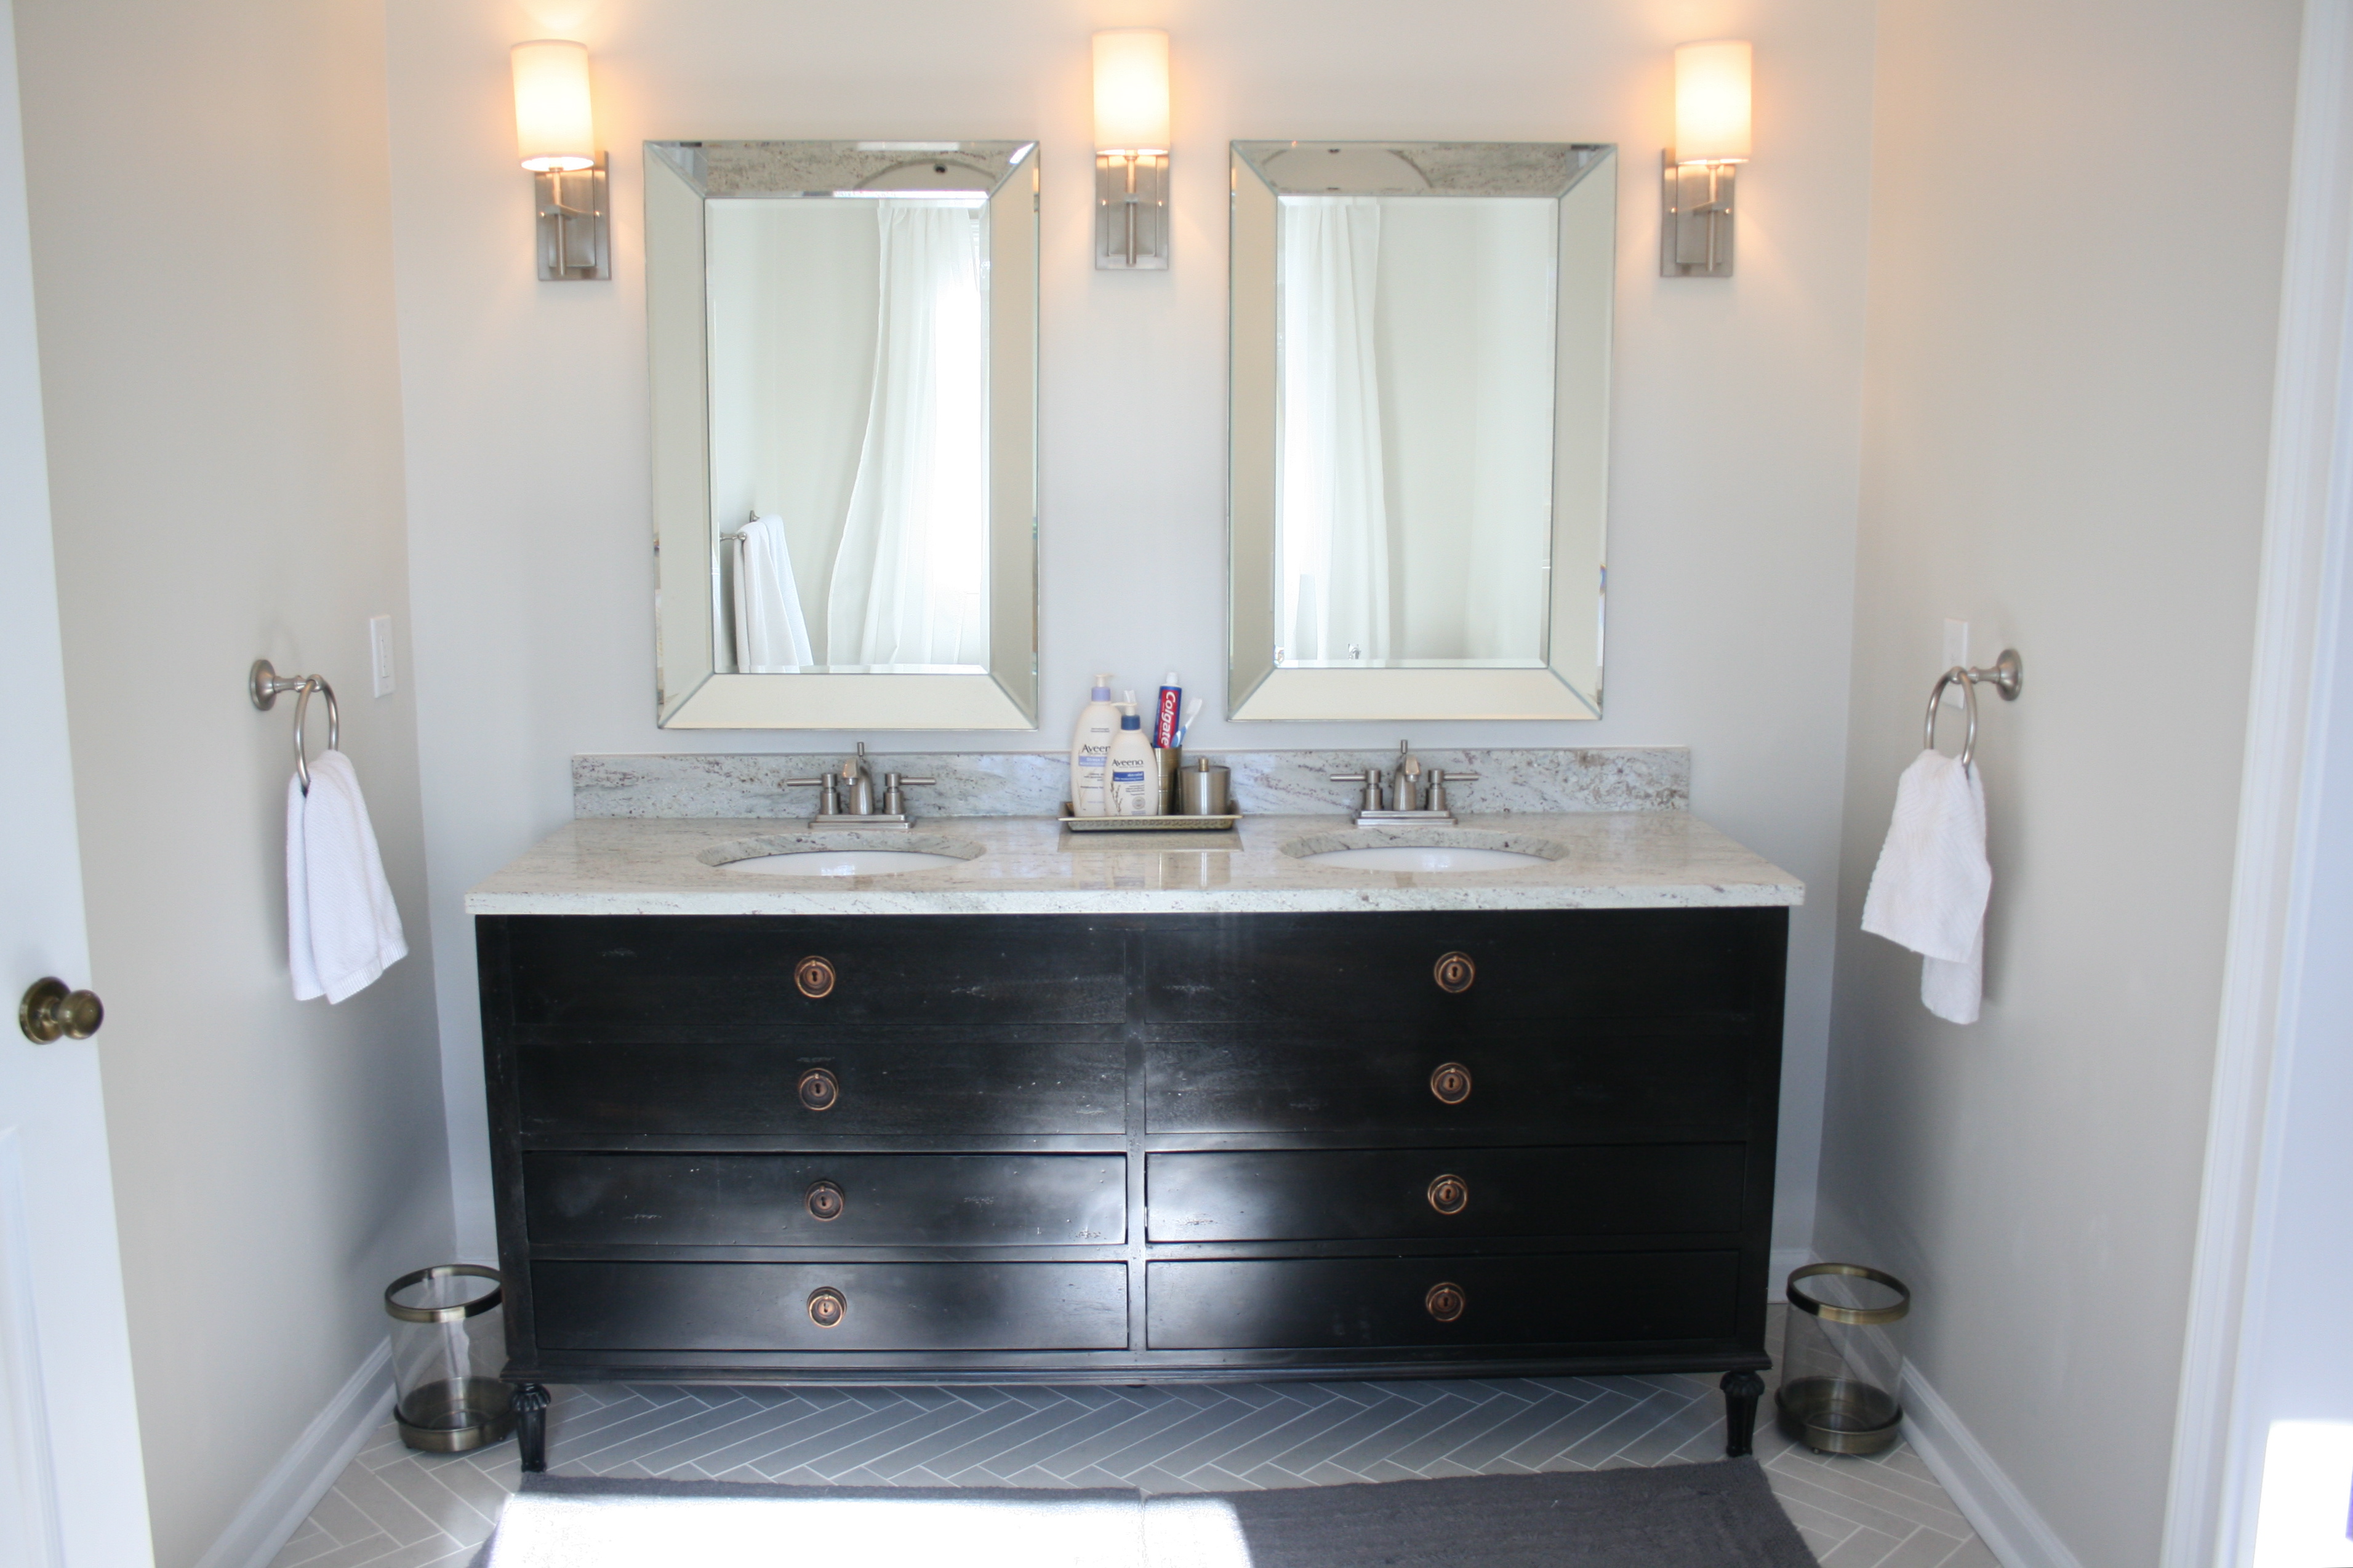 Master Bathroom Details and Sources